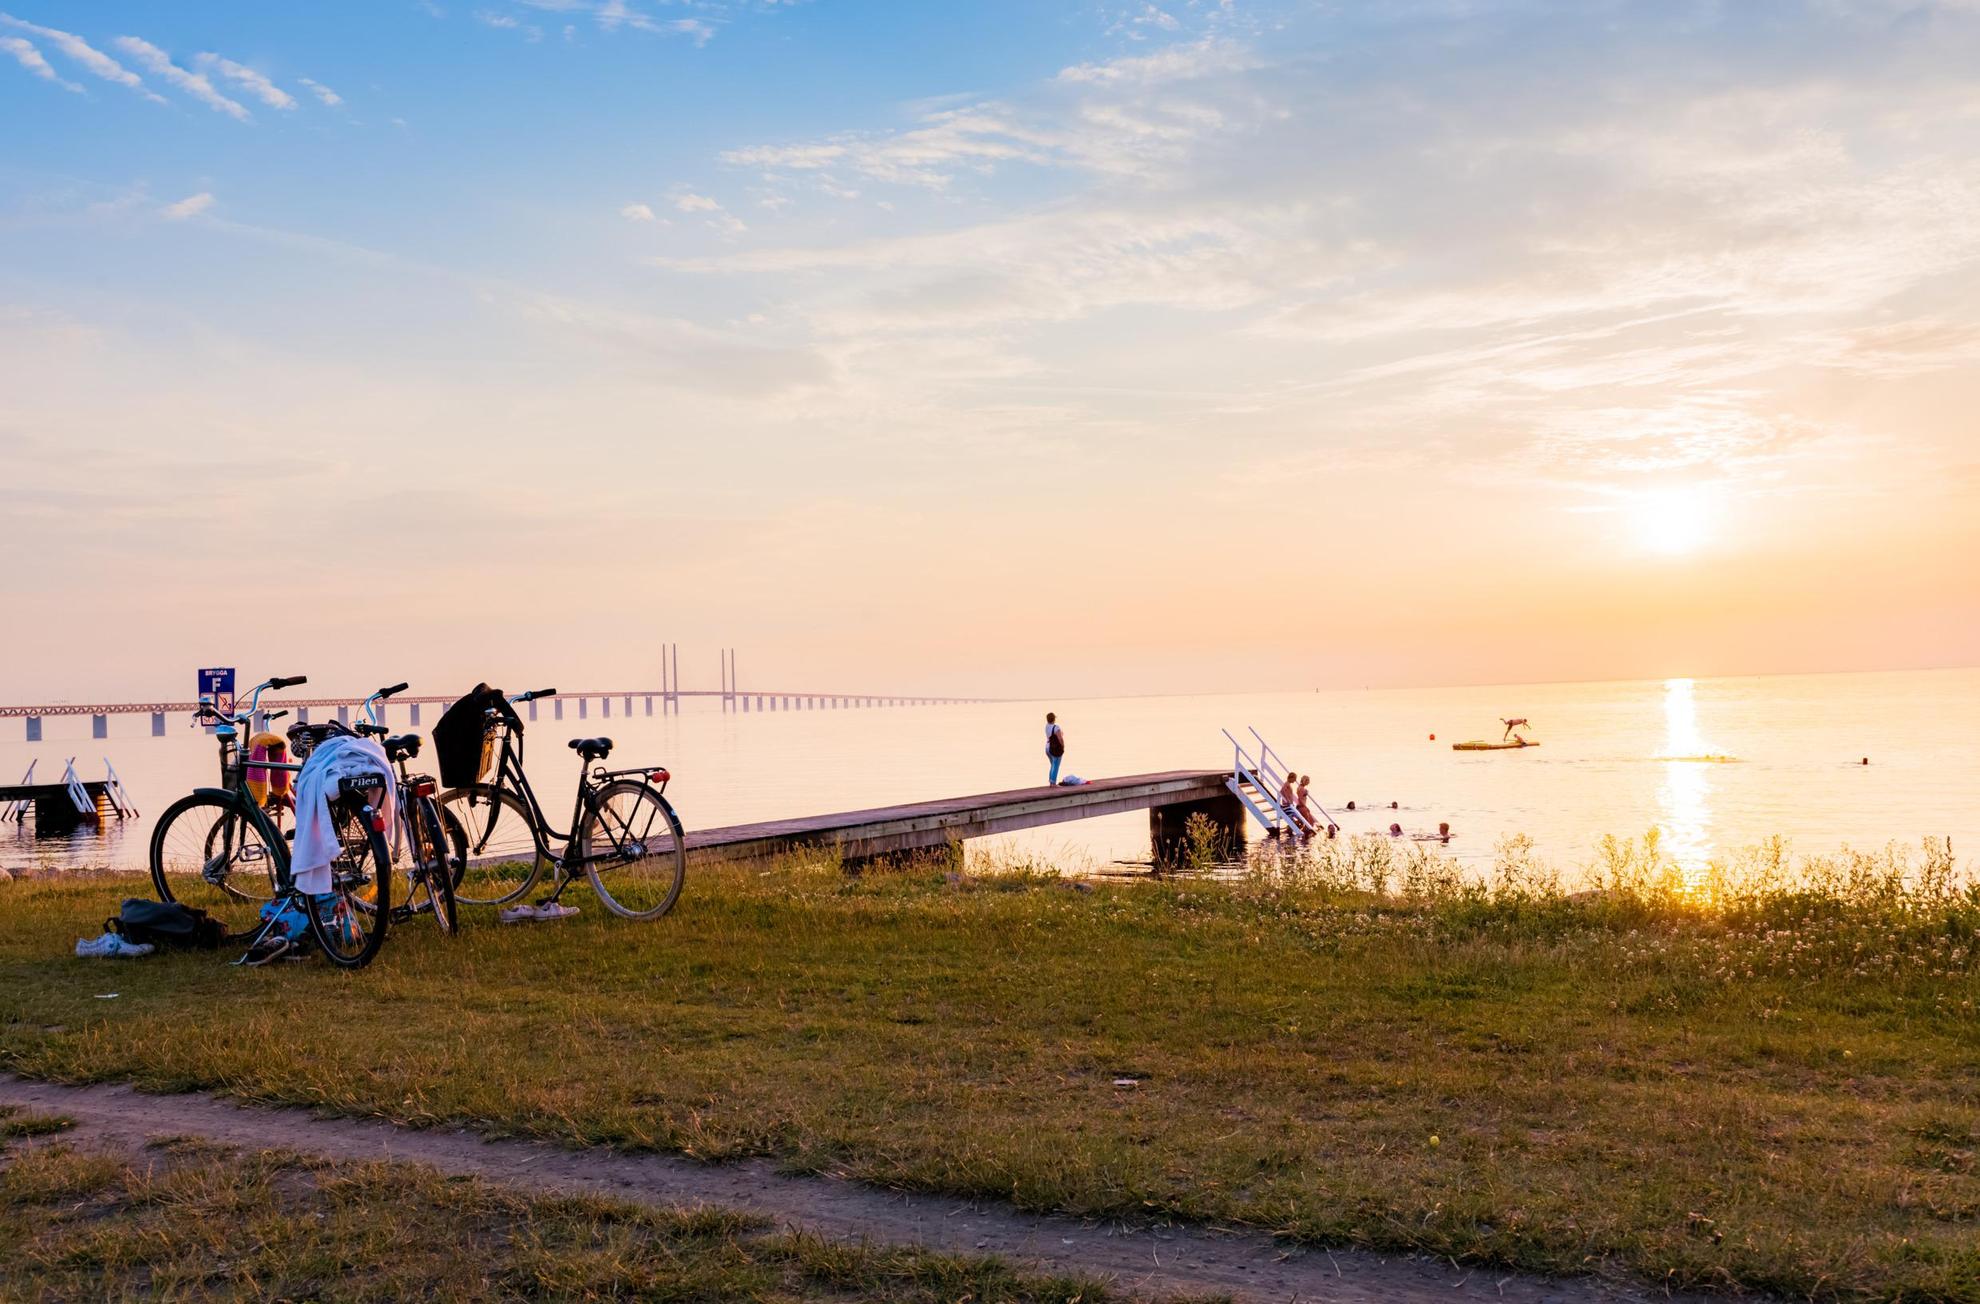 Sunset over a beach with a jetty. Two bikes are parked on the grass above the beach and several people are swimming in the sea. The Öresund Bridge in the background.